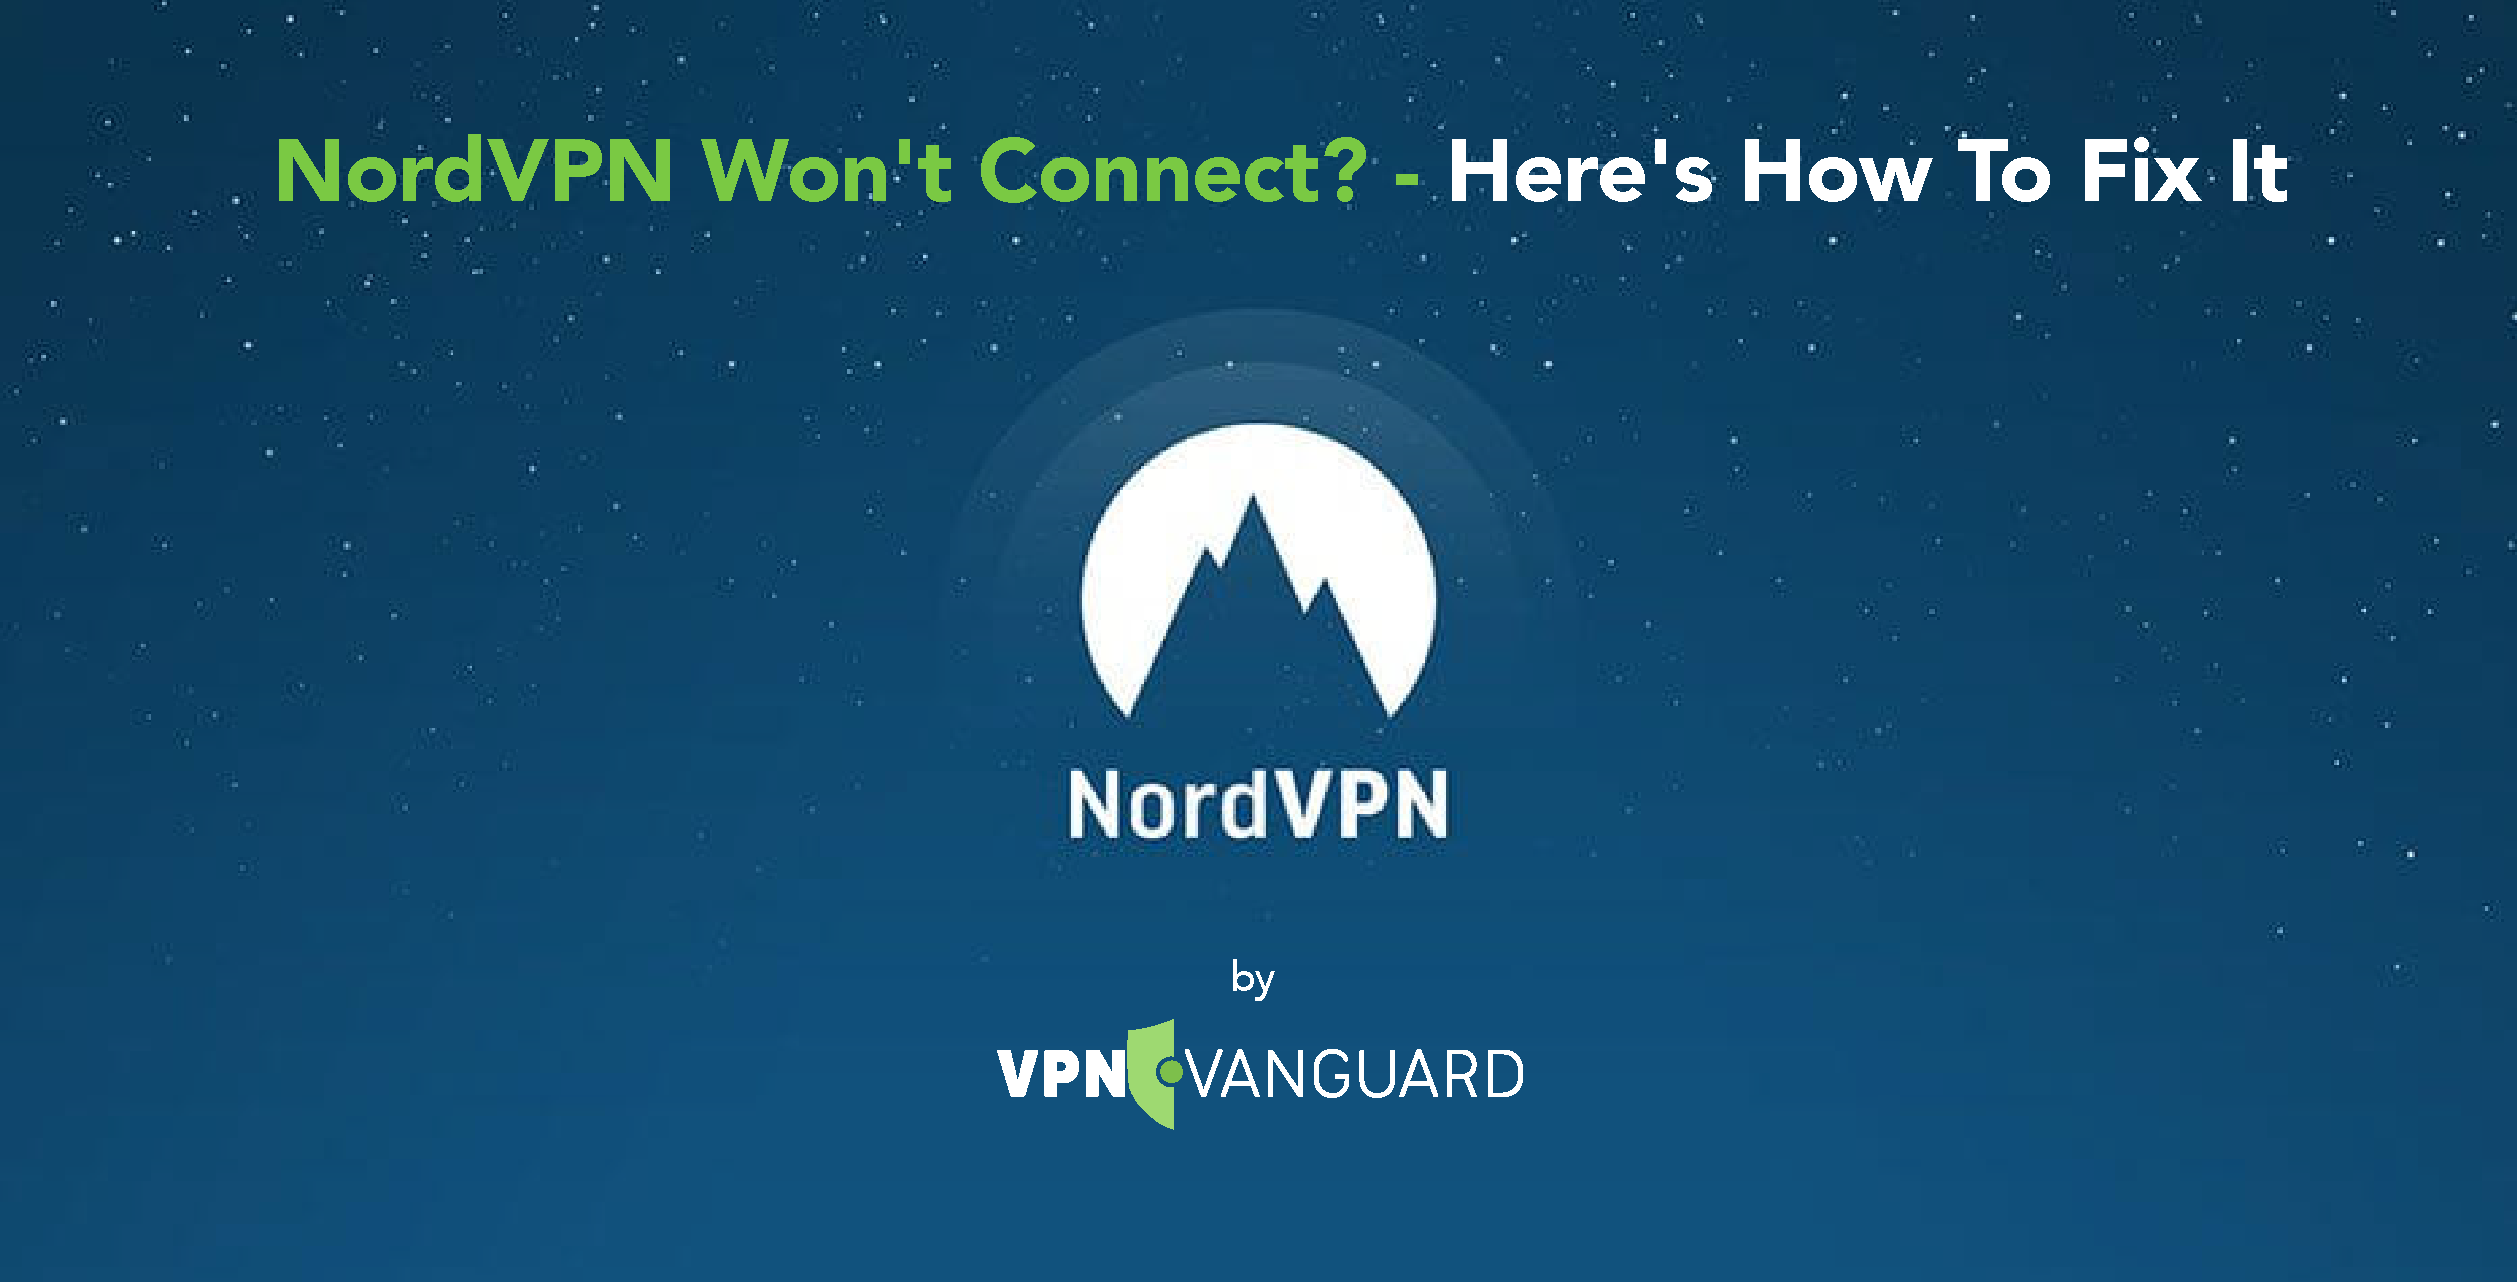 NordVPN Won't Connect? - Here's How To Fix It